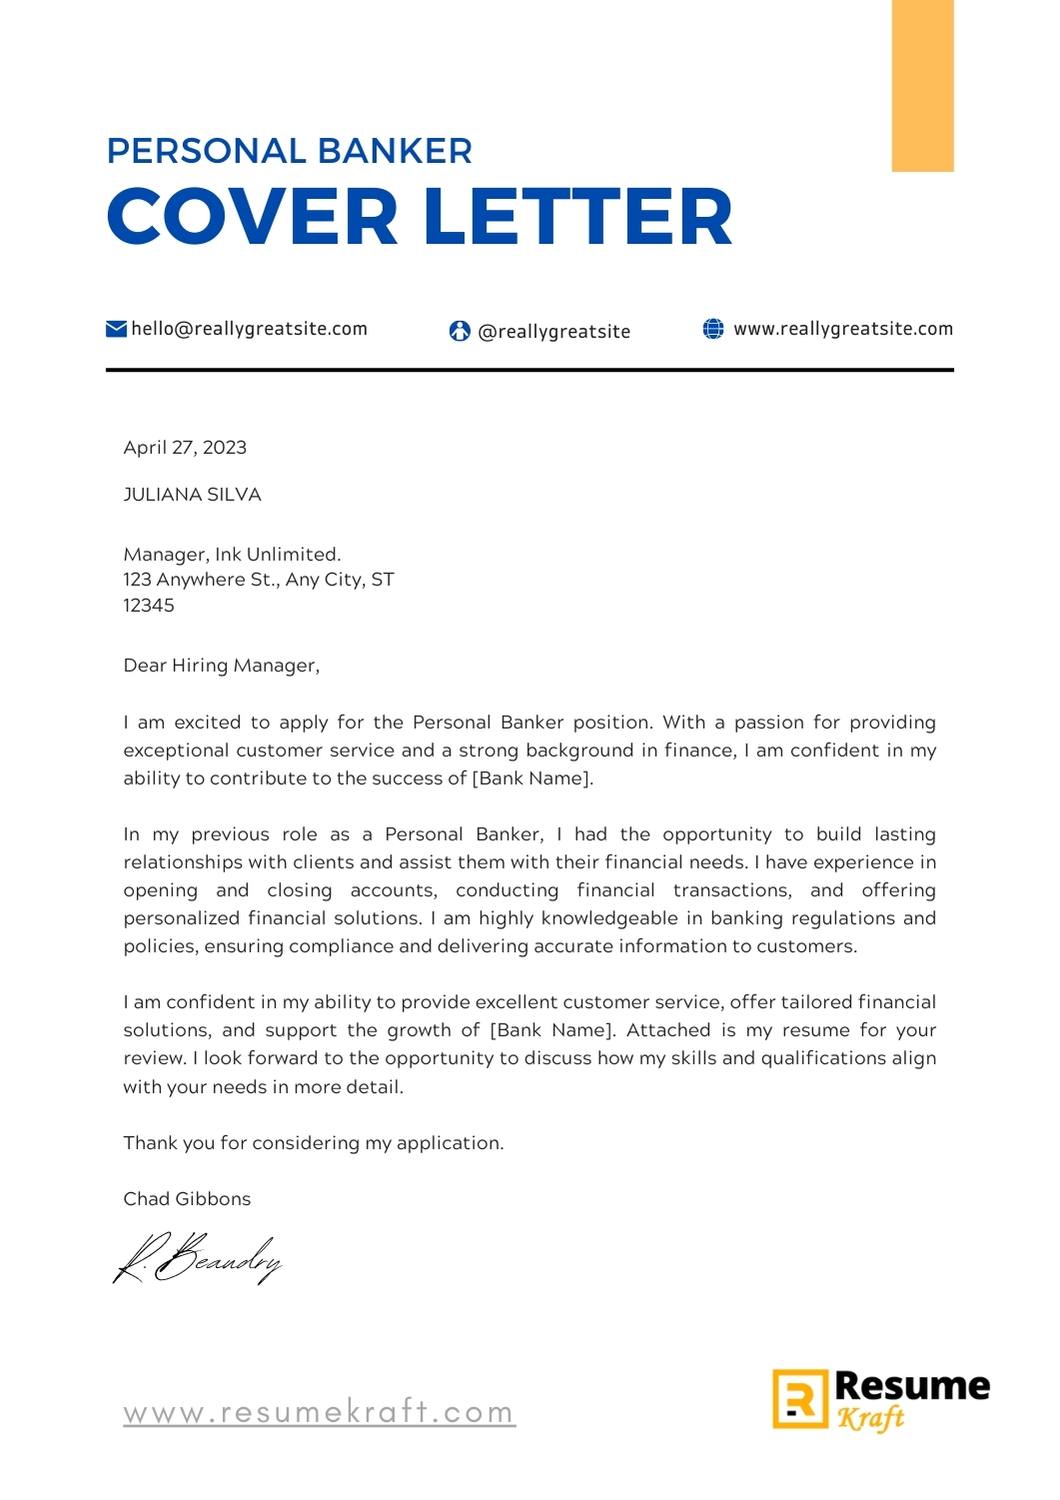 Personal Banker Cover Letter 